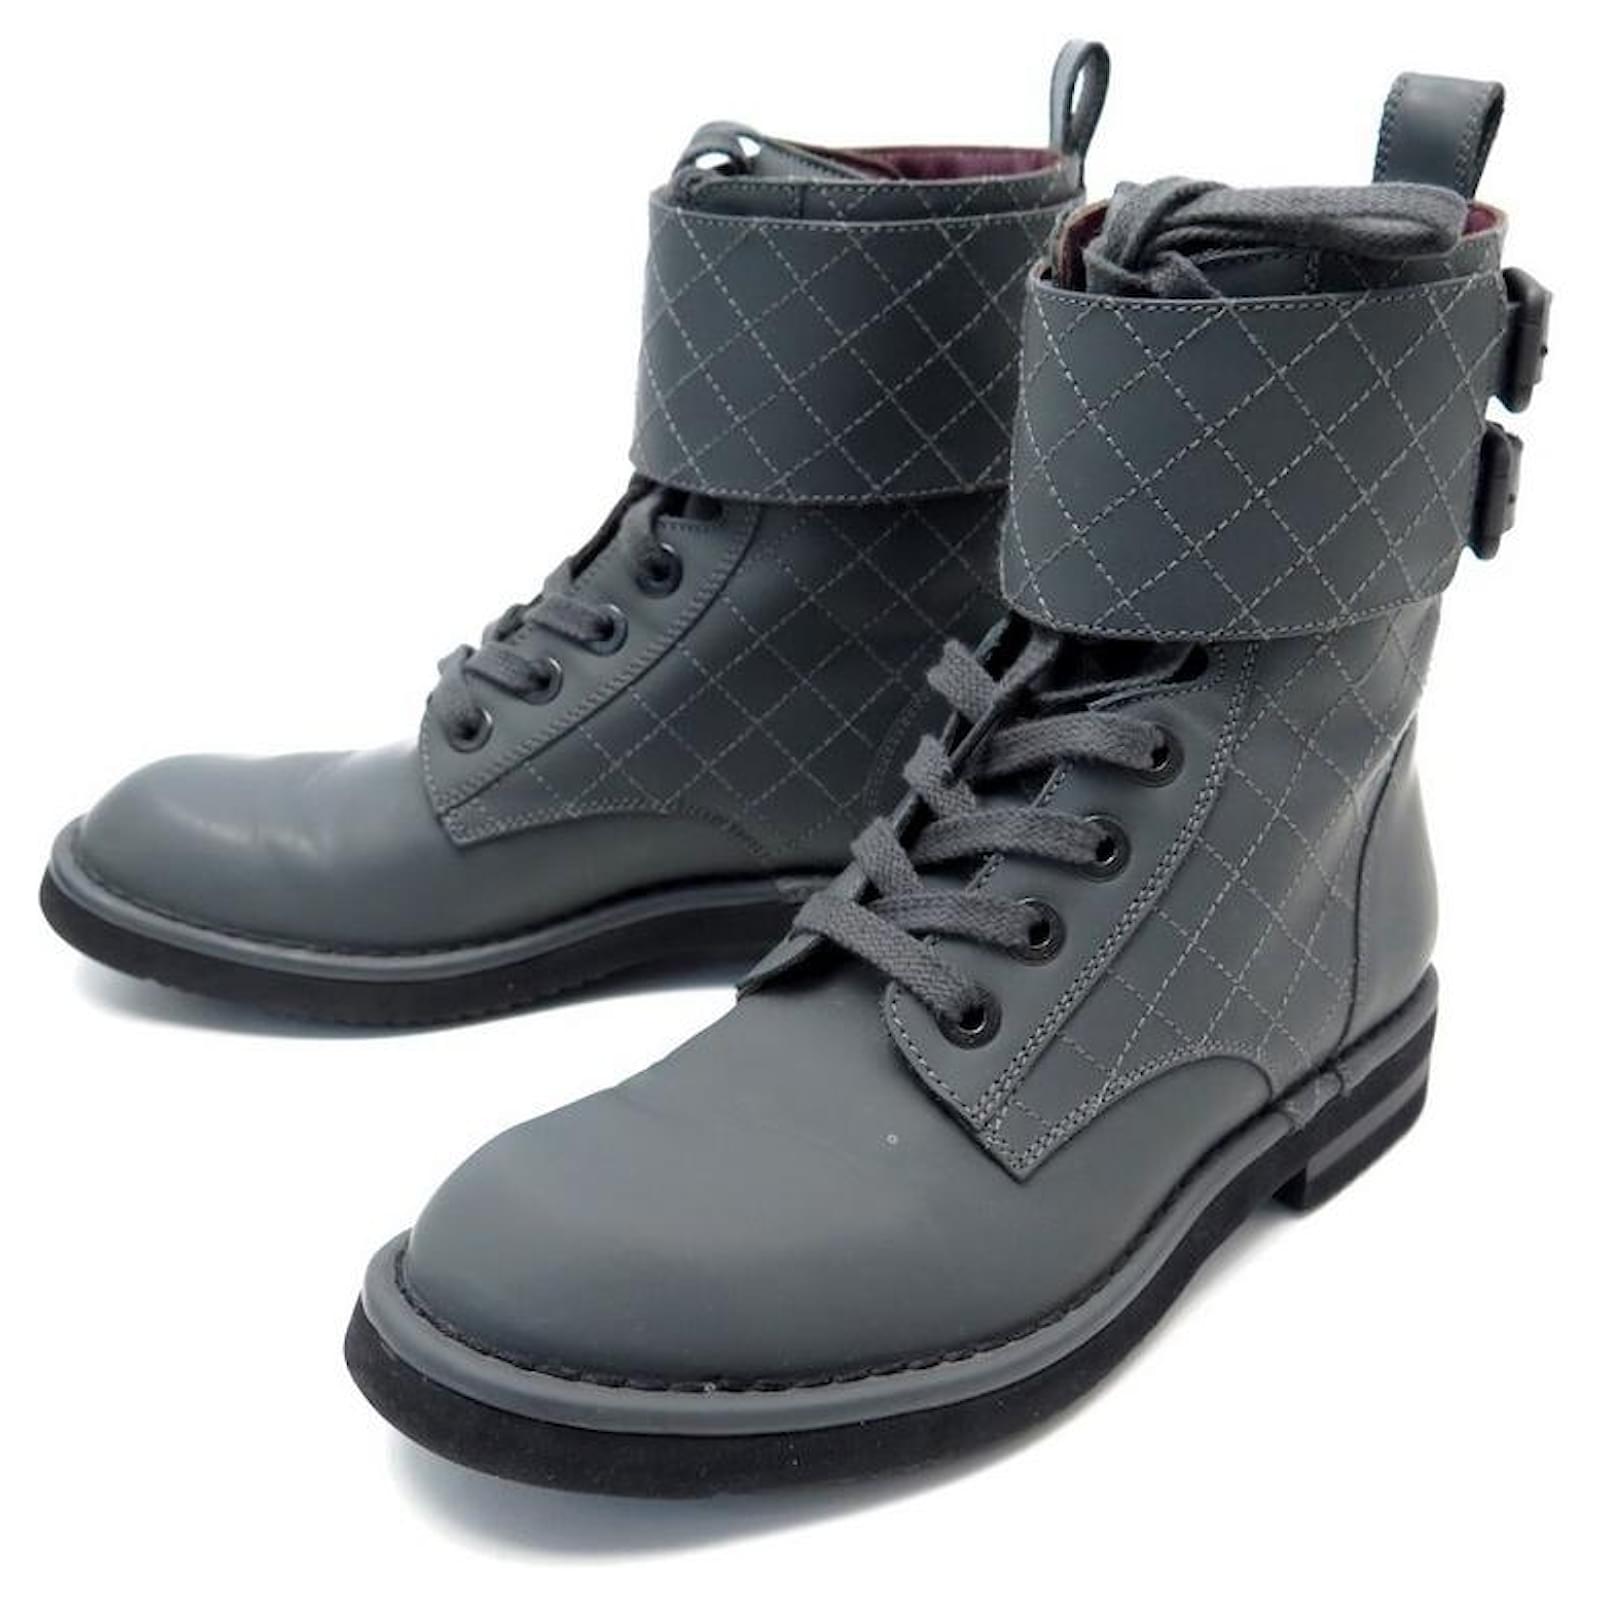 Stillehavsøer evaluerbare fire NEW CHANEL G ANKLE BOOTS30289 36.5 37 QUILTED LEATHER RANGERS COMBAT BOOTS  Grey ref.714834 - Joli Closet